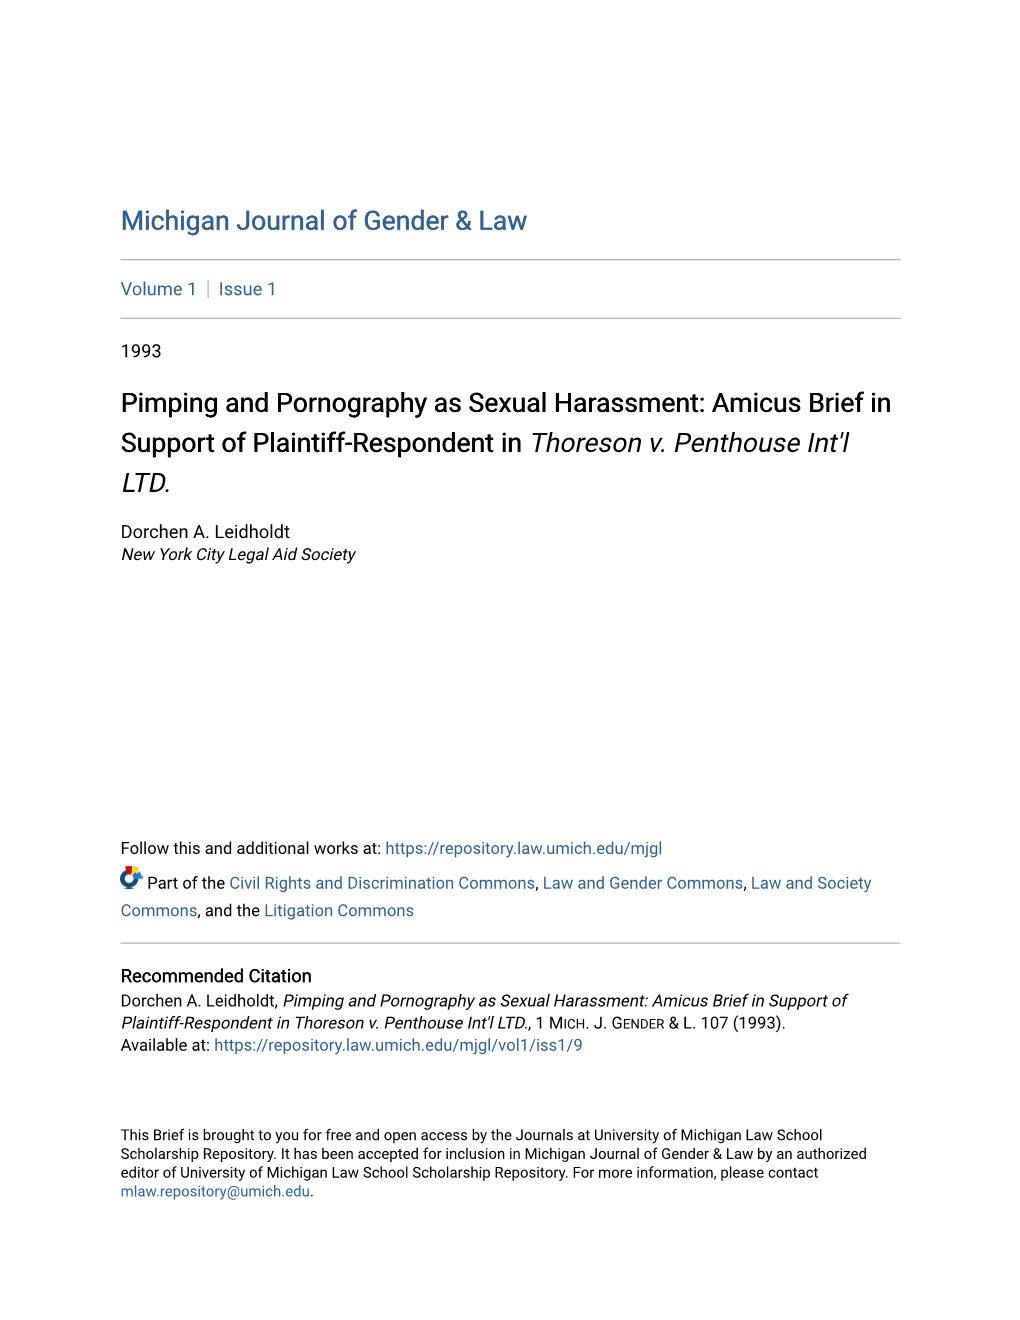 Pimping and Pornography As Sexual Harassment: Amicus Brief in Support of Plaintiff-Respondent in Thoreson V